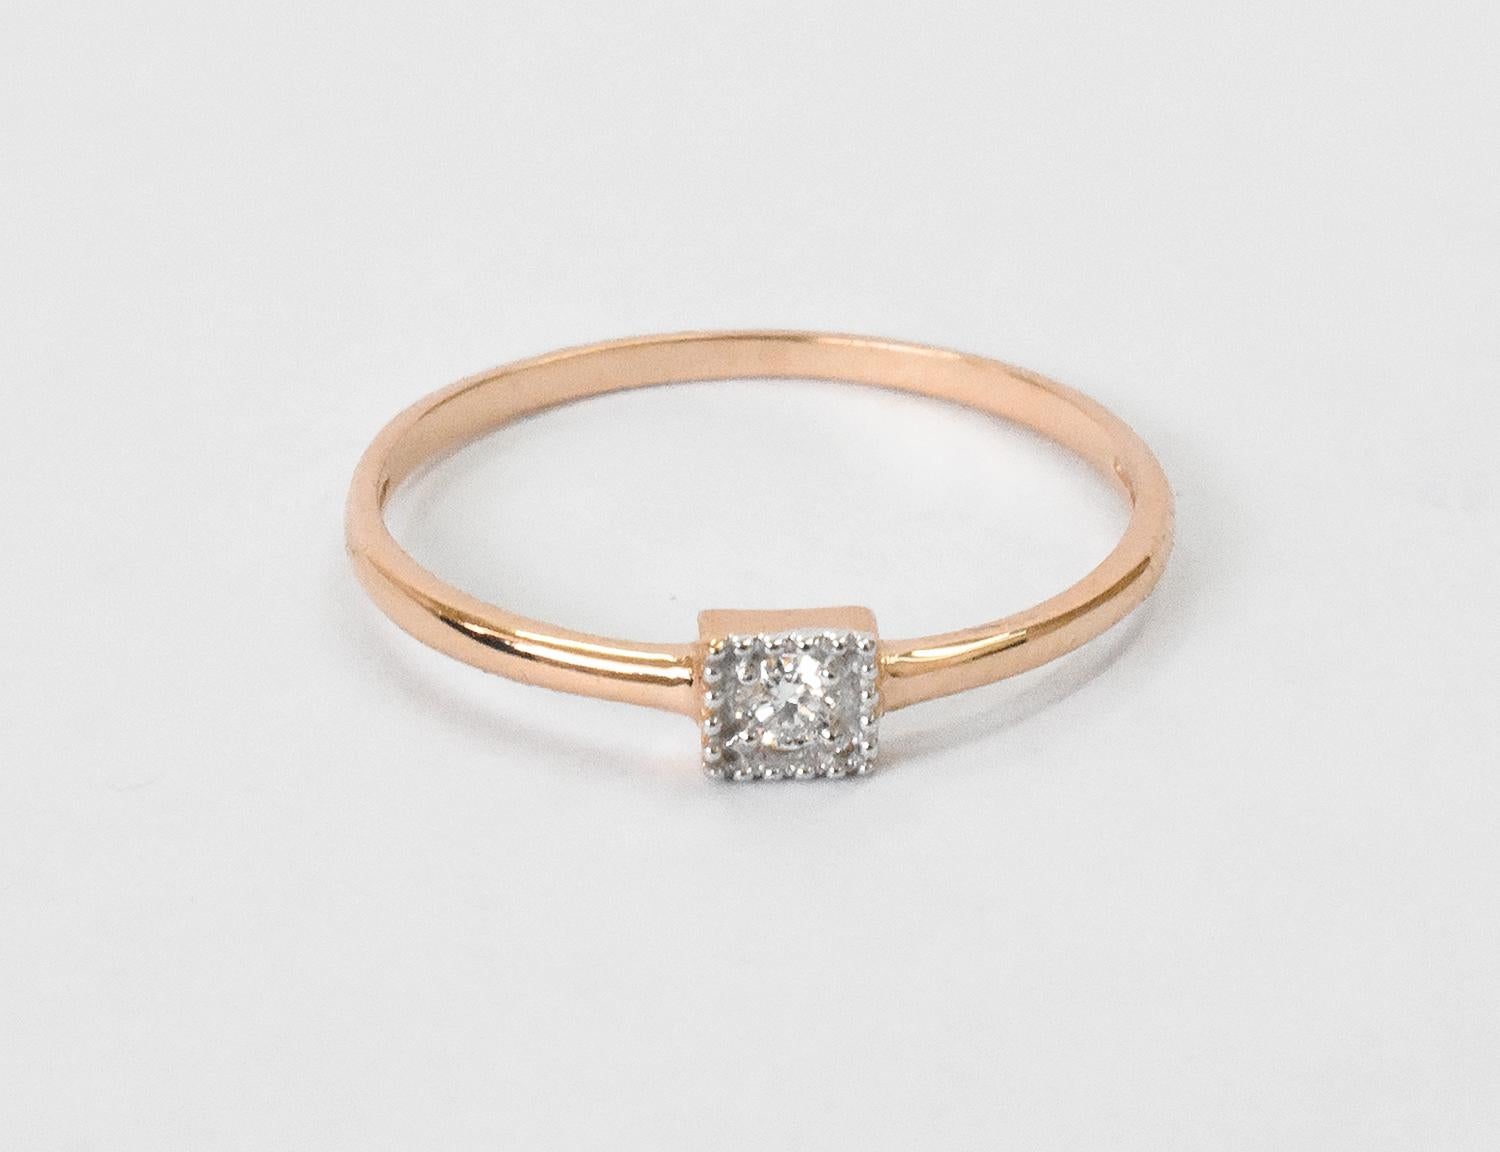 For Sale:  18k Gold Diamond Solitaire Ring Square Diamond Engagement Ring 4